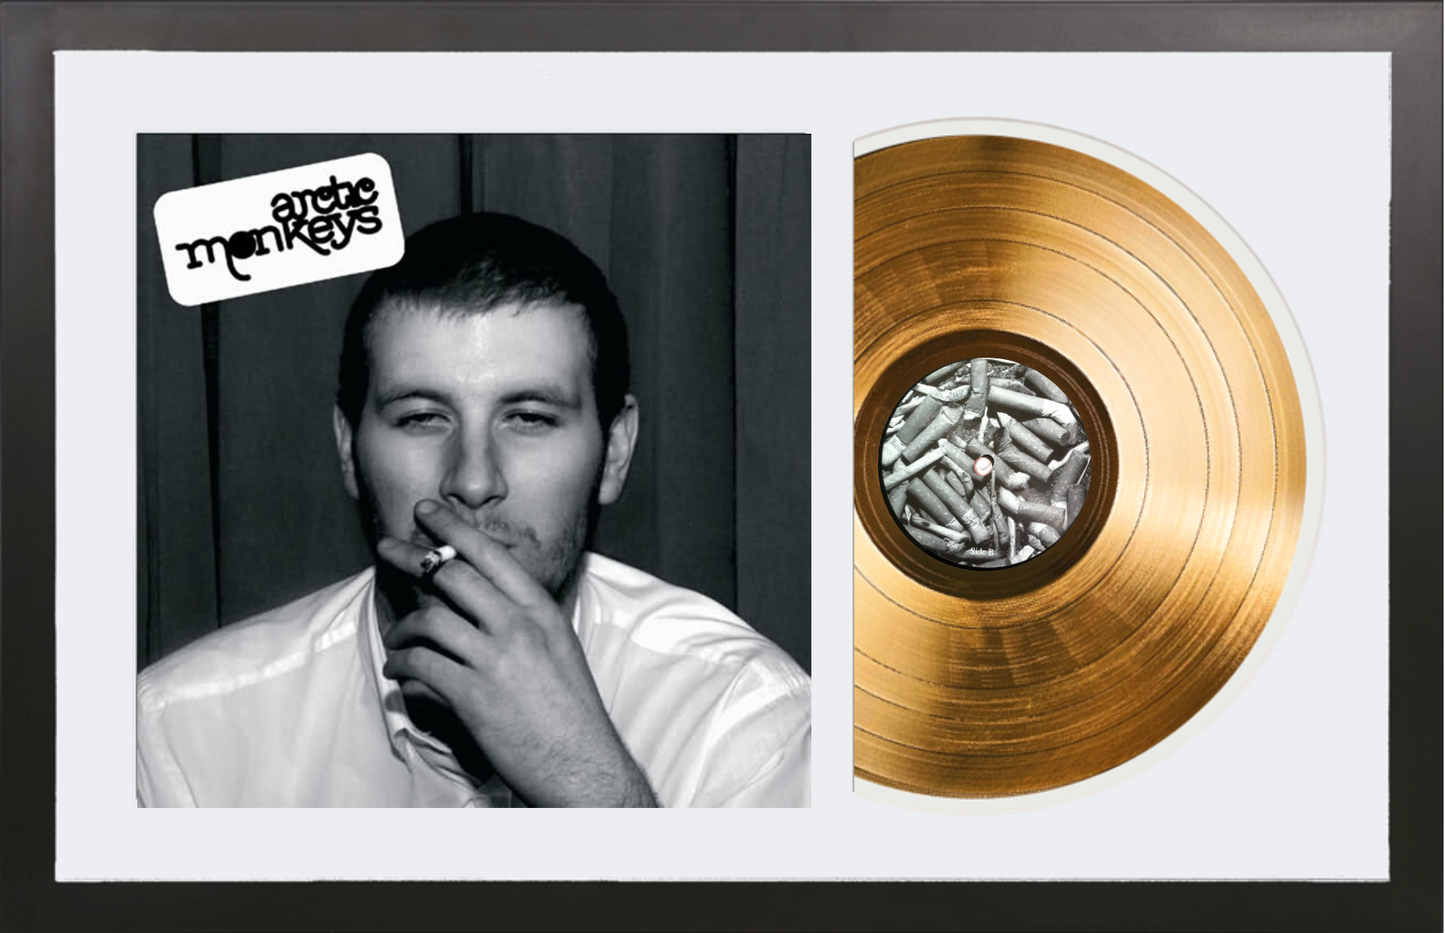 Arctic Monkeys - Whatever People Say I Am, That’s What I’m Not - 14K Gold Plated Vinyl